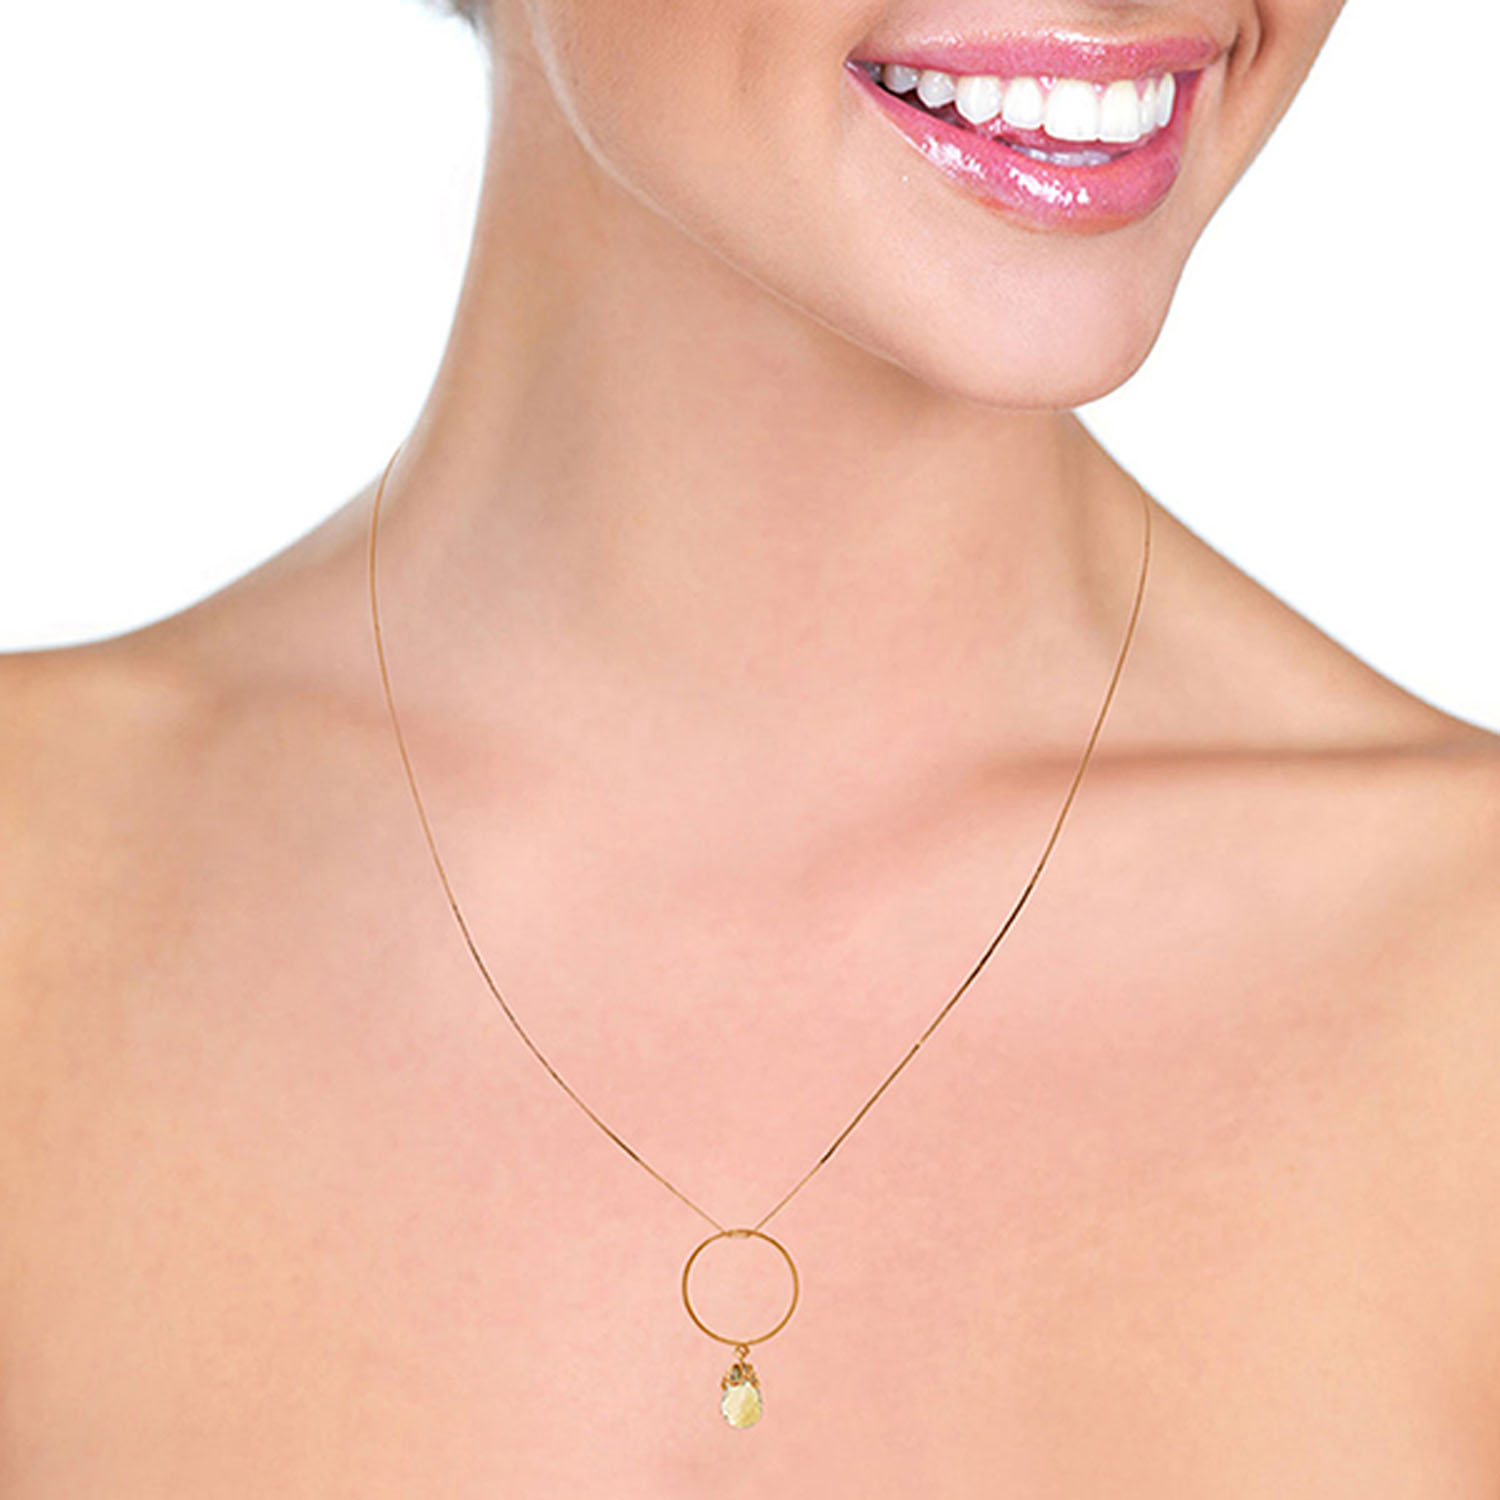 Galaxy Gold 3 Carat 14k 20" Solid Rose Gold Necklace with Natural Citrine Charm Circle Pendant - image 2 of 2